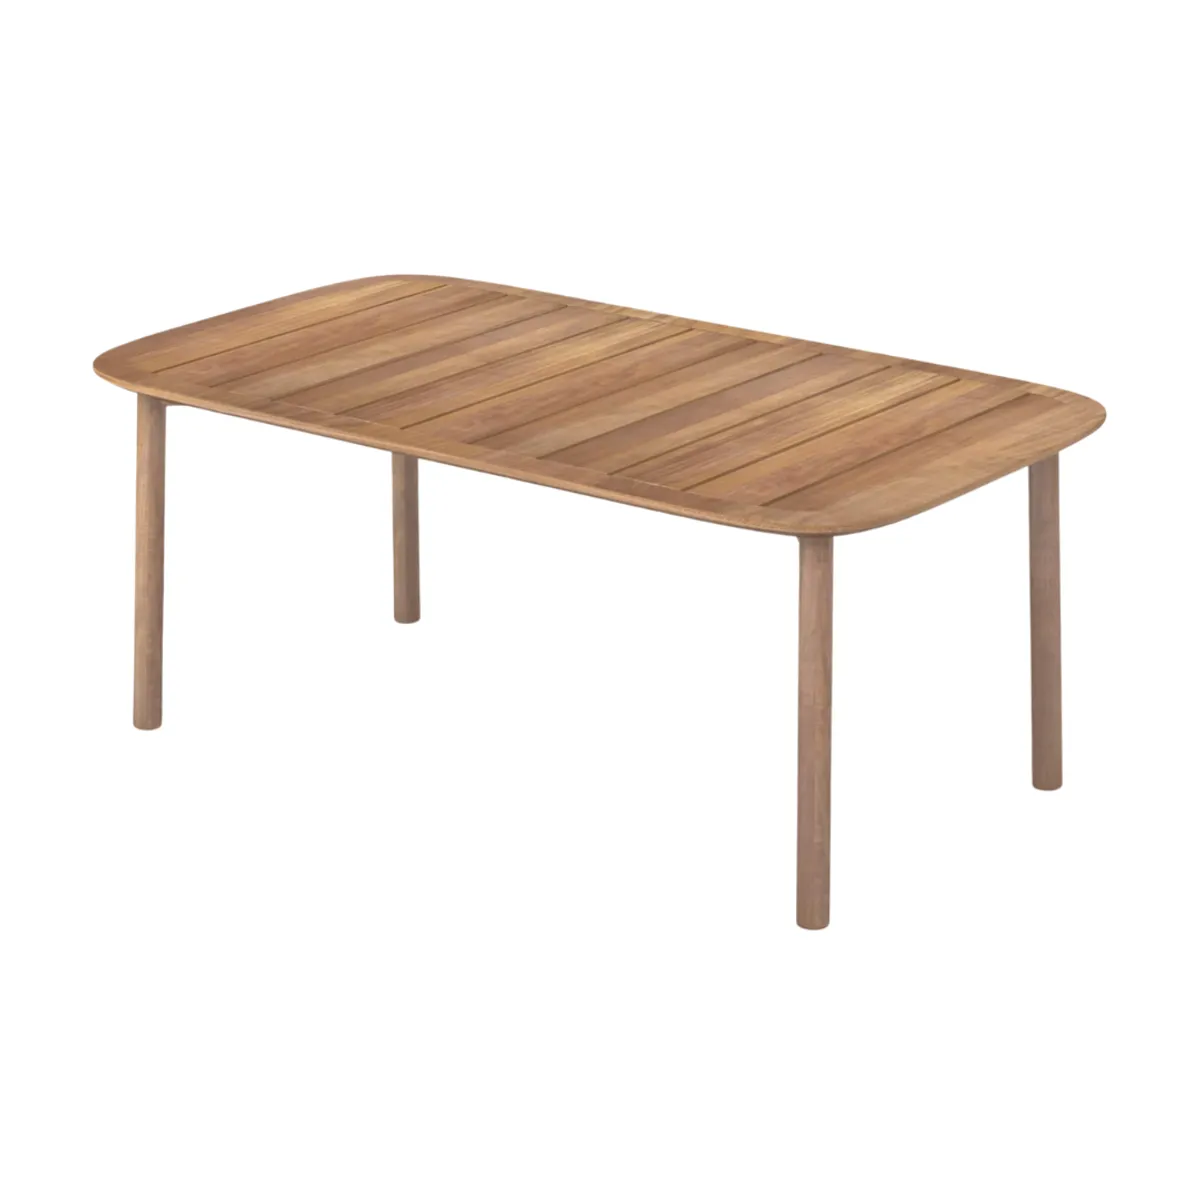 Meira dining table 1